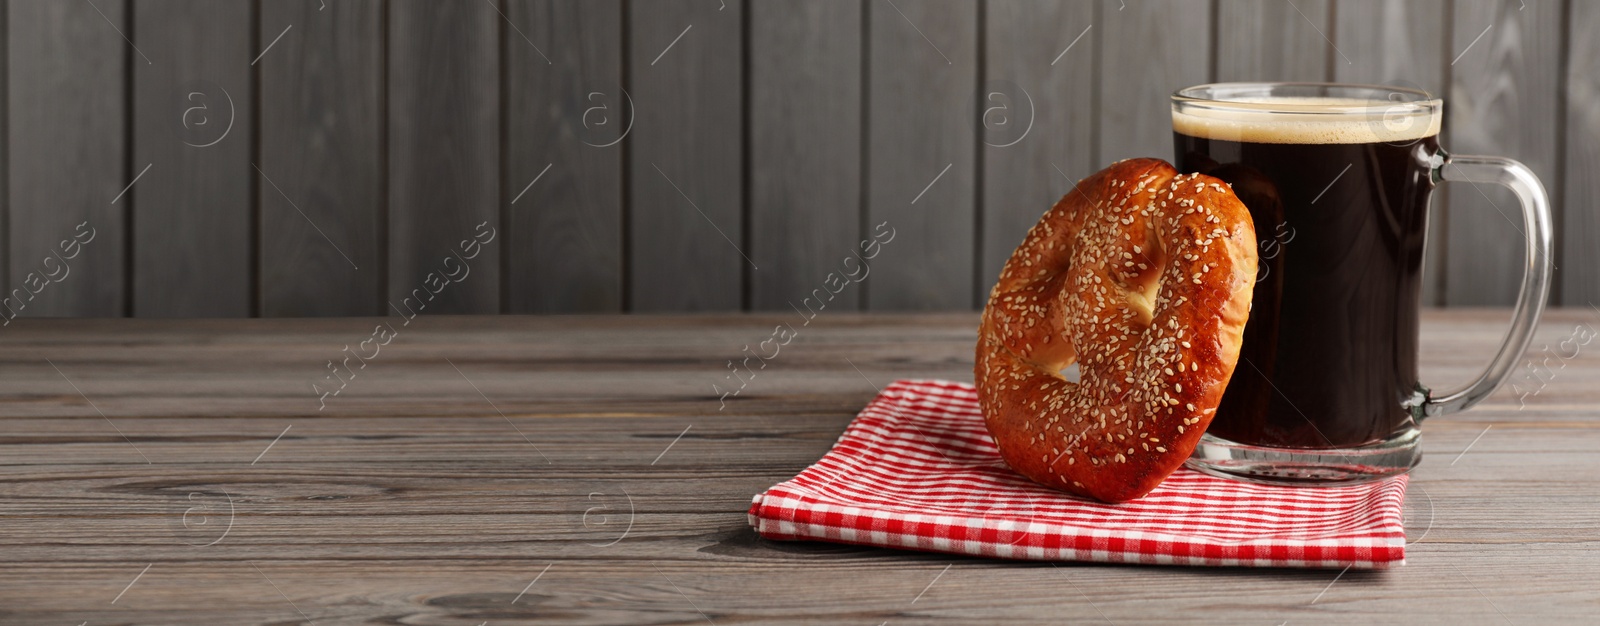 Image of Tasty pretzel and glass of beer on wooden table, space for text. Banner design